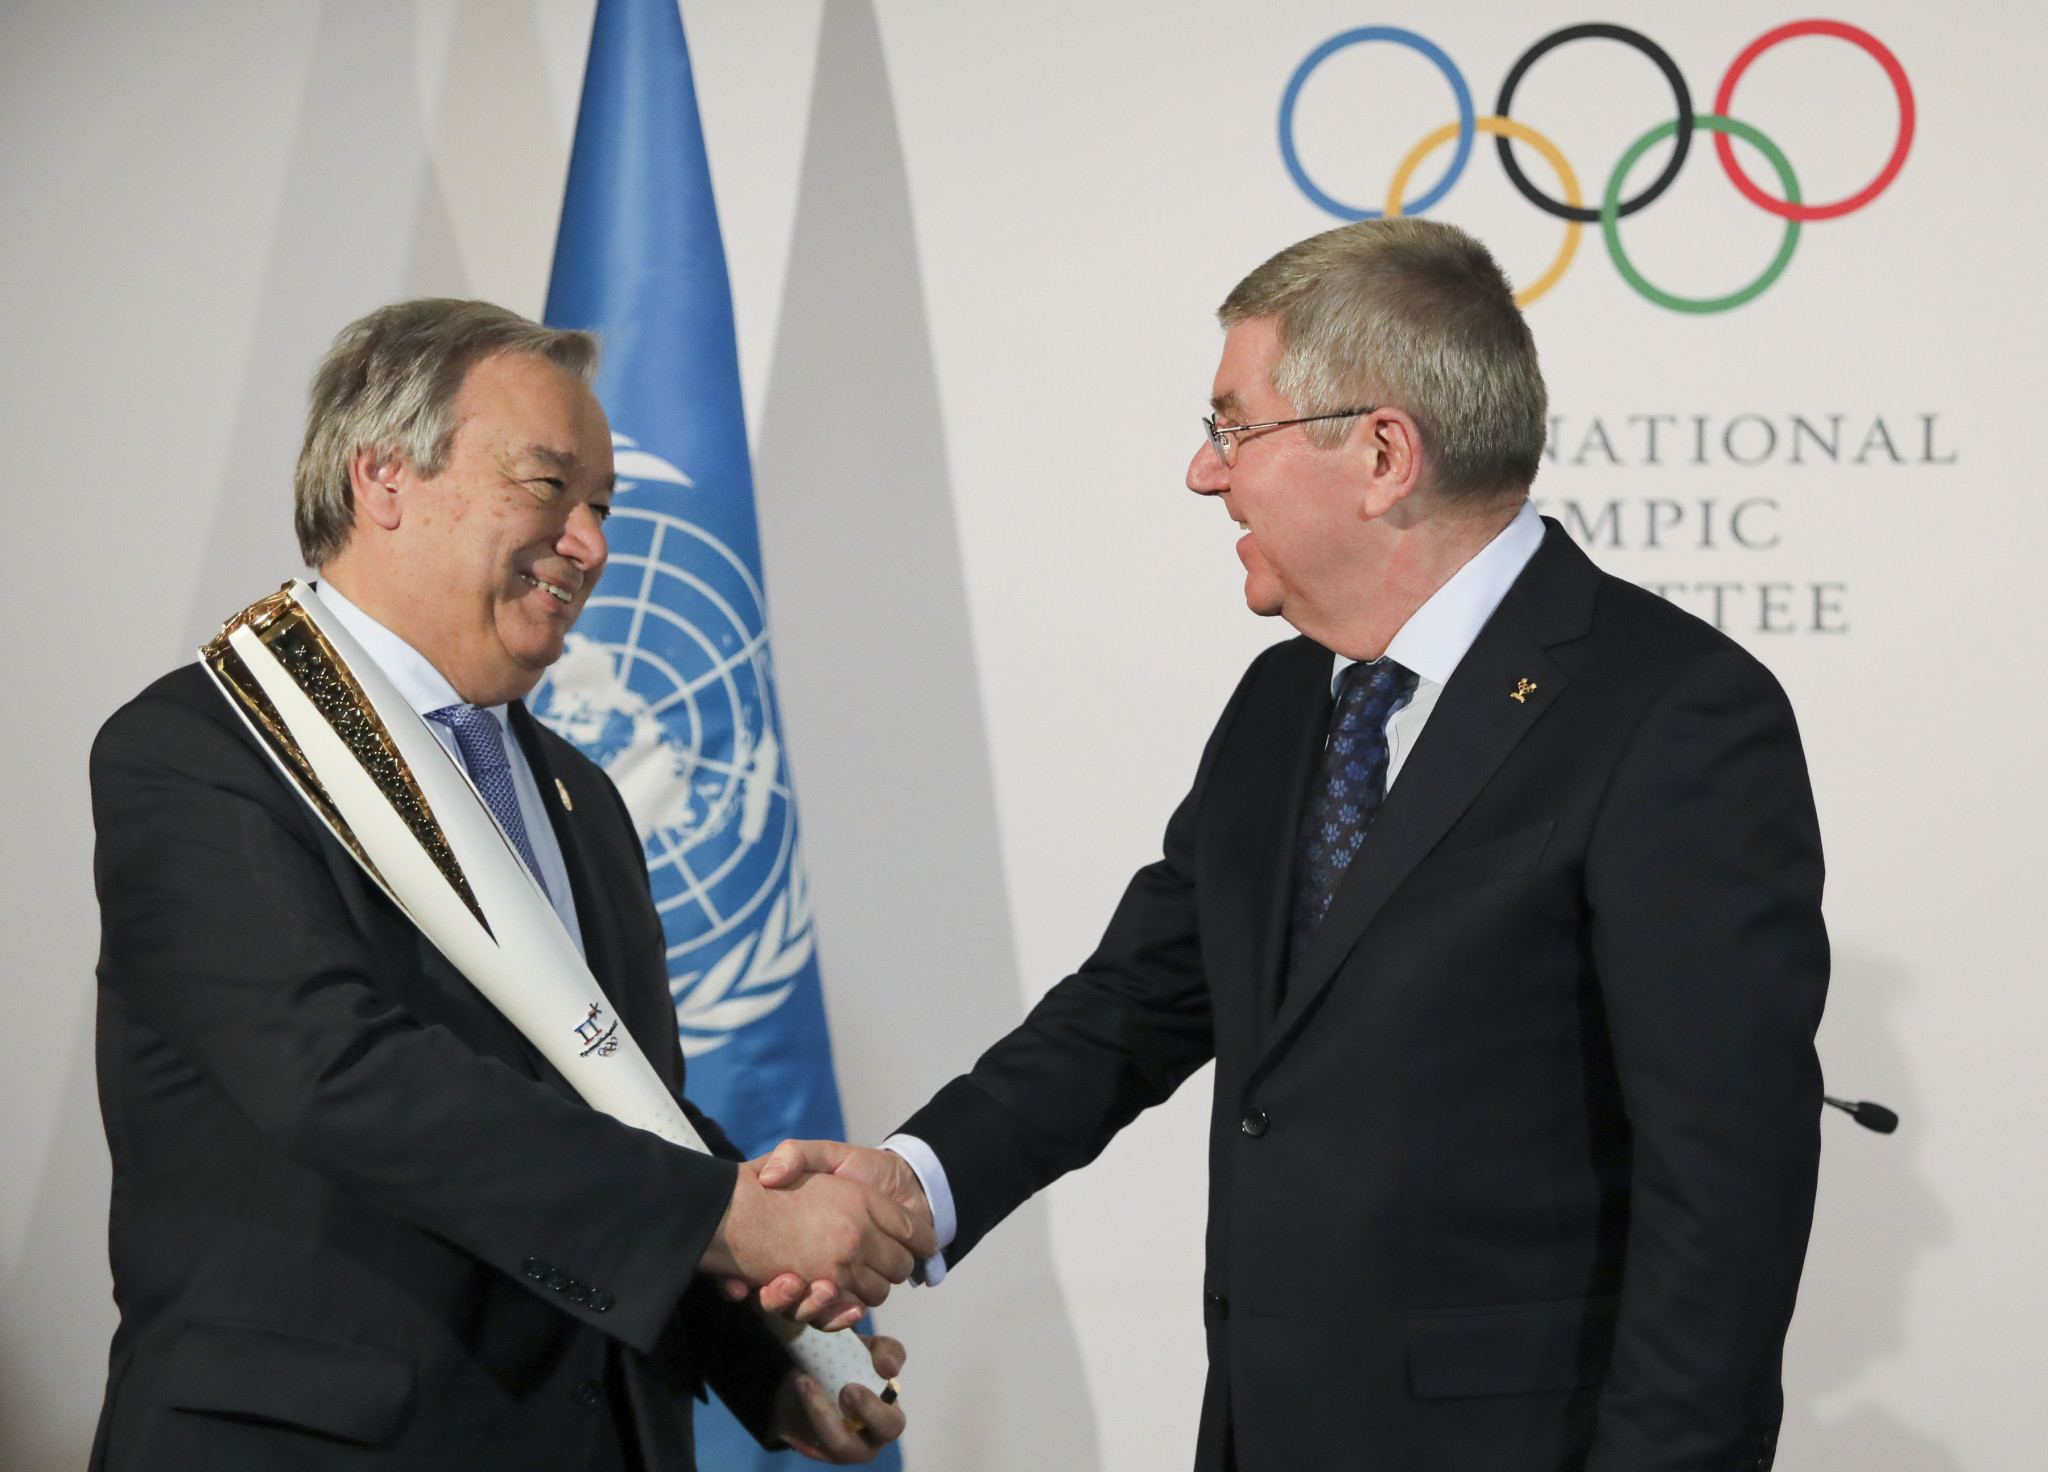 UN secretary general signals start of Olympic Truce during Tokyo 2020